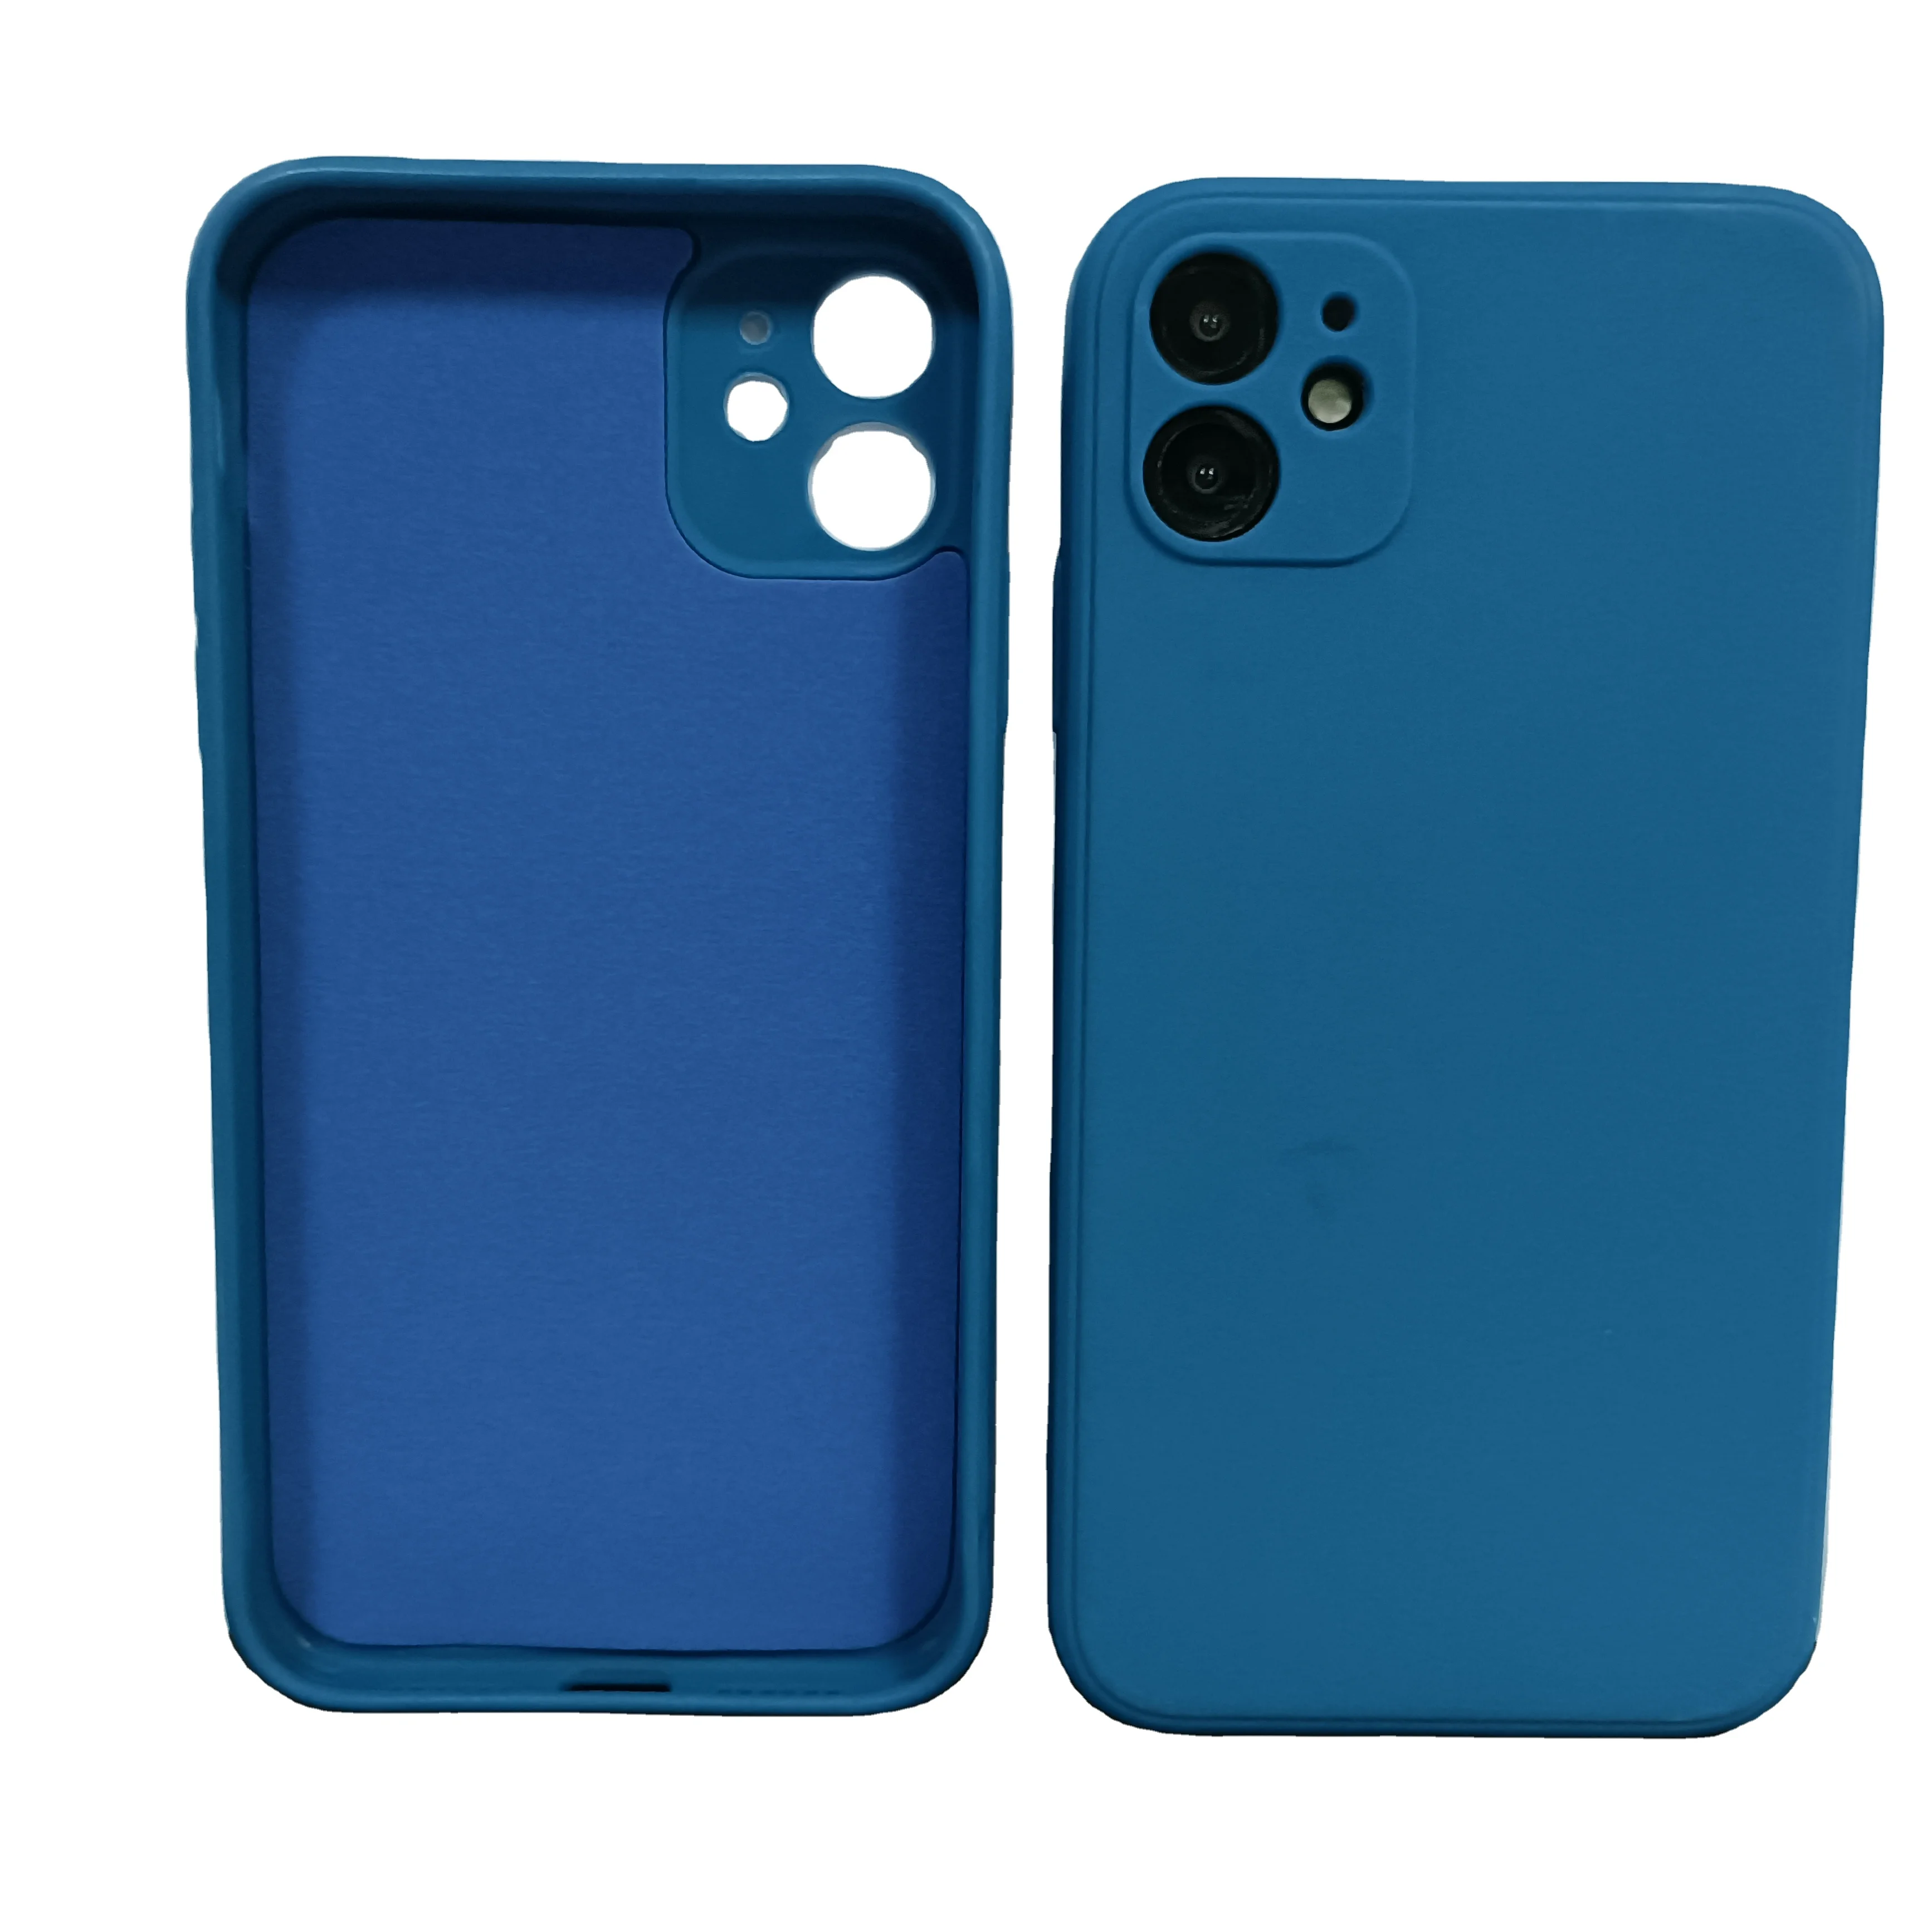 Promotional shockproof square silicone smtt TPU frosted protector phone cases for iphone 11 12 13 pro Back cover